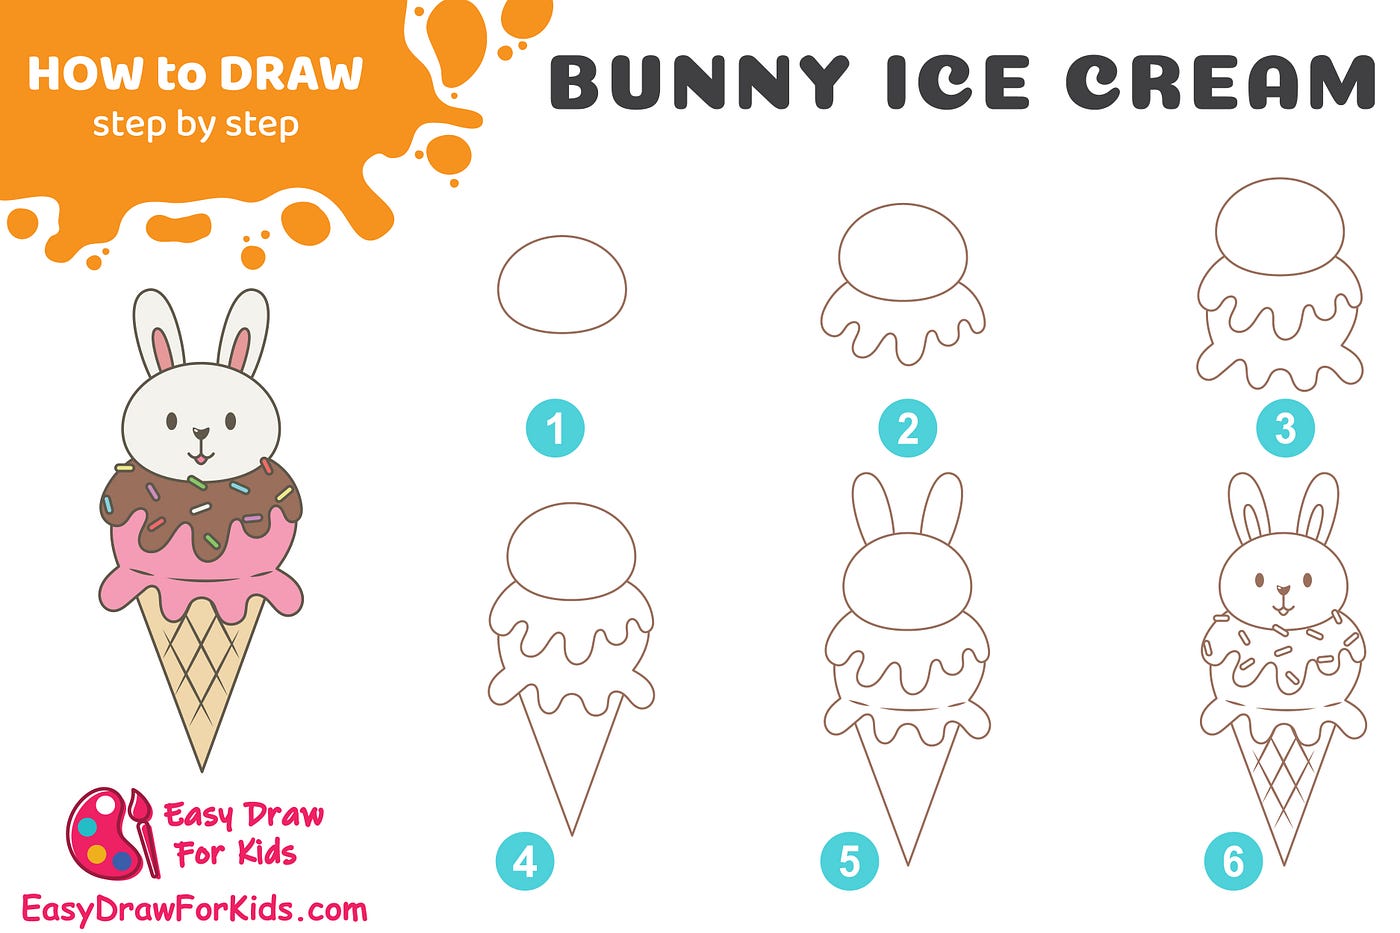 Guide to Drawing Kawaii Characters : Part 1 : How to Draw Kawaii People,  Expressions, Faces, Body Poses - How to Draw Step by Step Drawing Tutorials